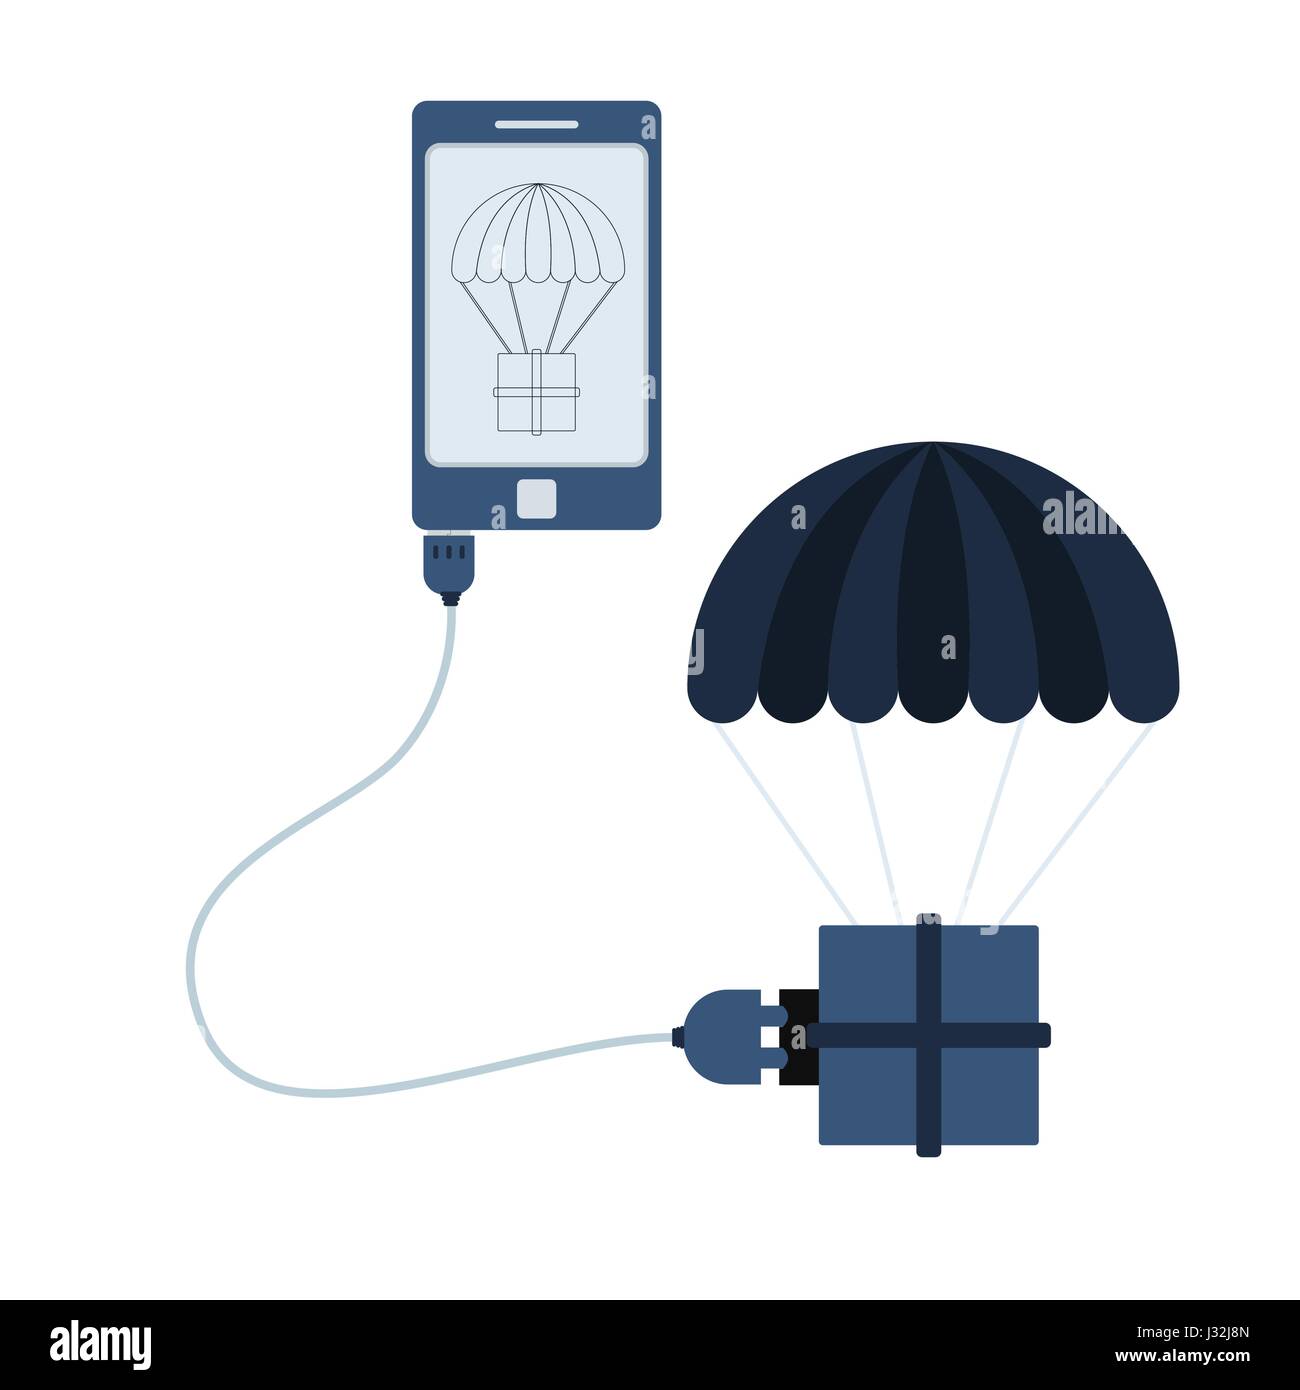 Delivery connected to a cell phone through a usb cable. Outline of the parachute being shown on the mobile monitor. Flat design. Isolated. Stock Vector